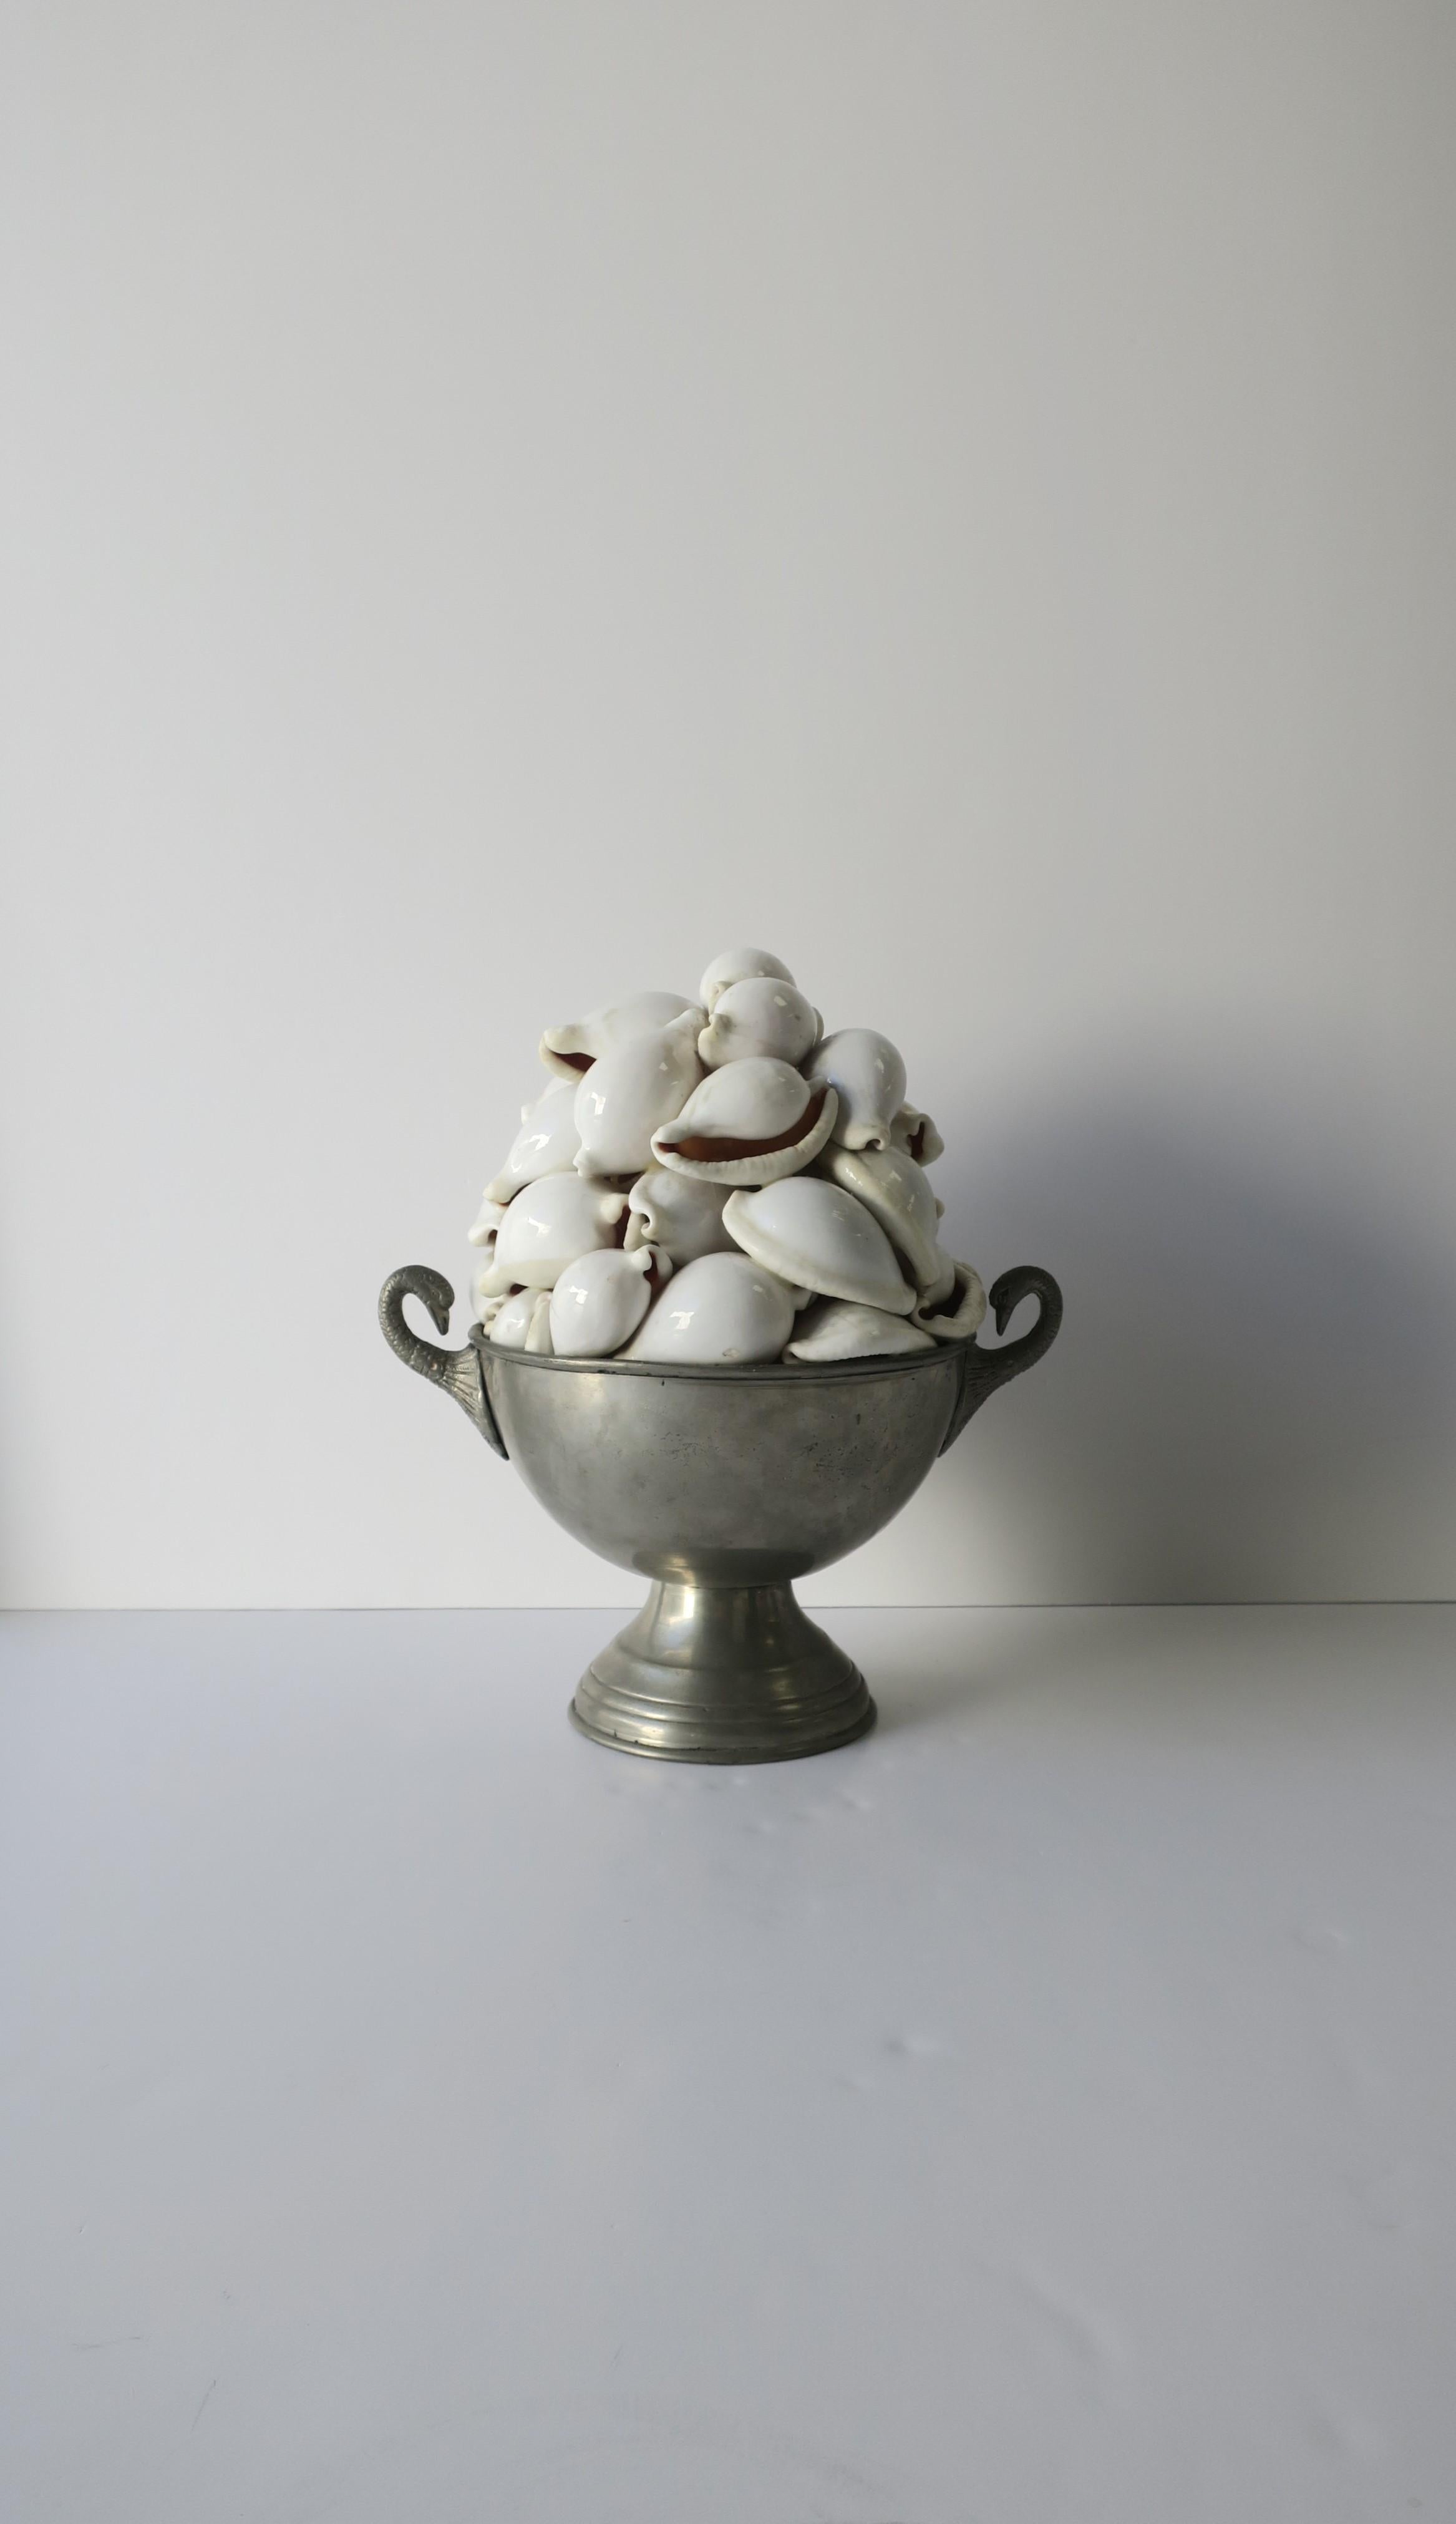 A beautiful seashell and urn sculpture piece decorative object, circa early-20th century. Piece/sculpture 'topiary' has a metal urn base with bird handle design, filled with white seashells (shells are attached to one-another and attached to urn,